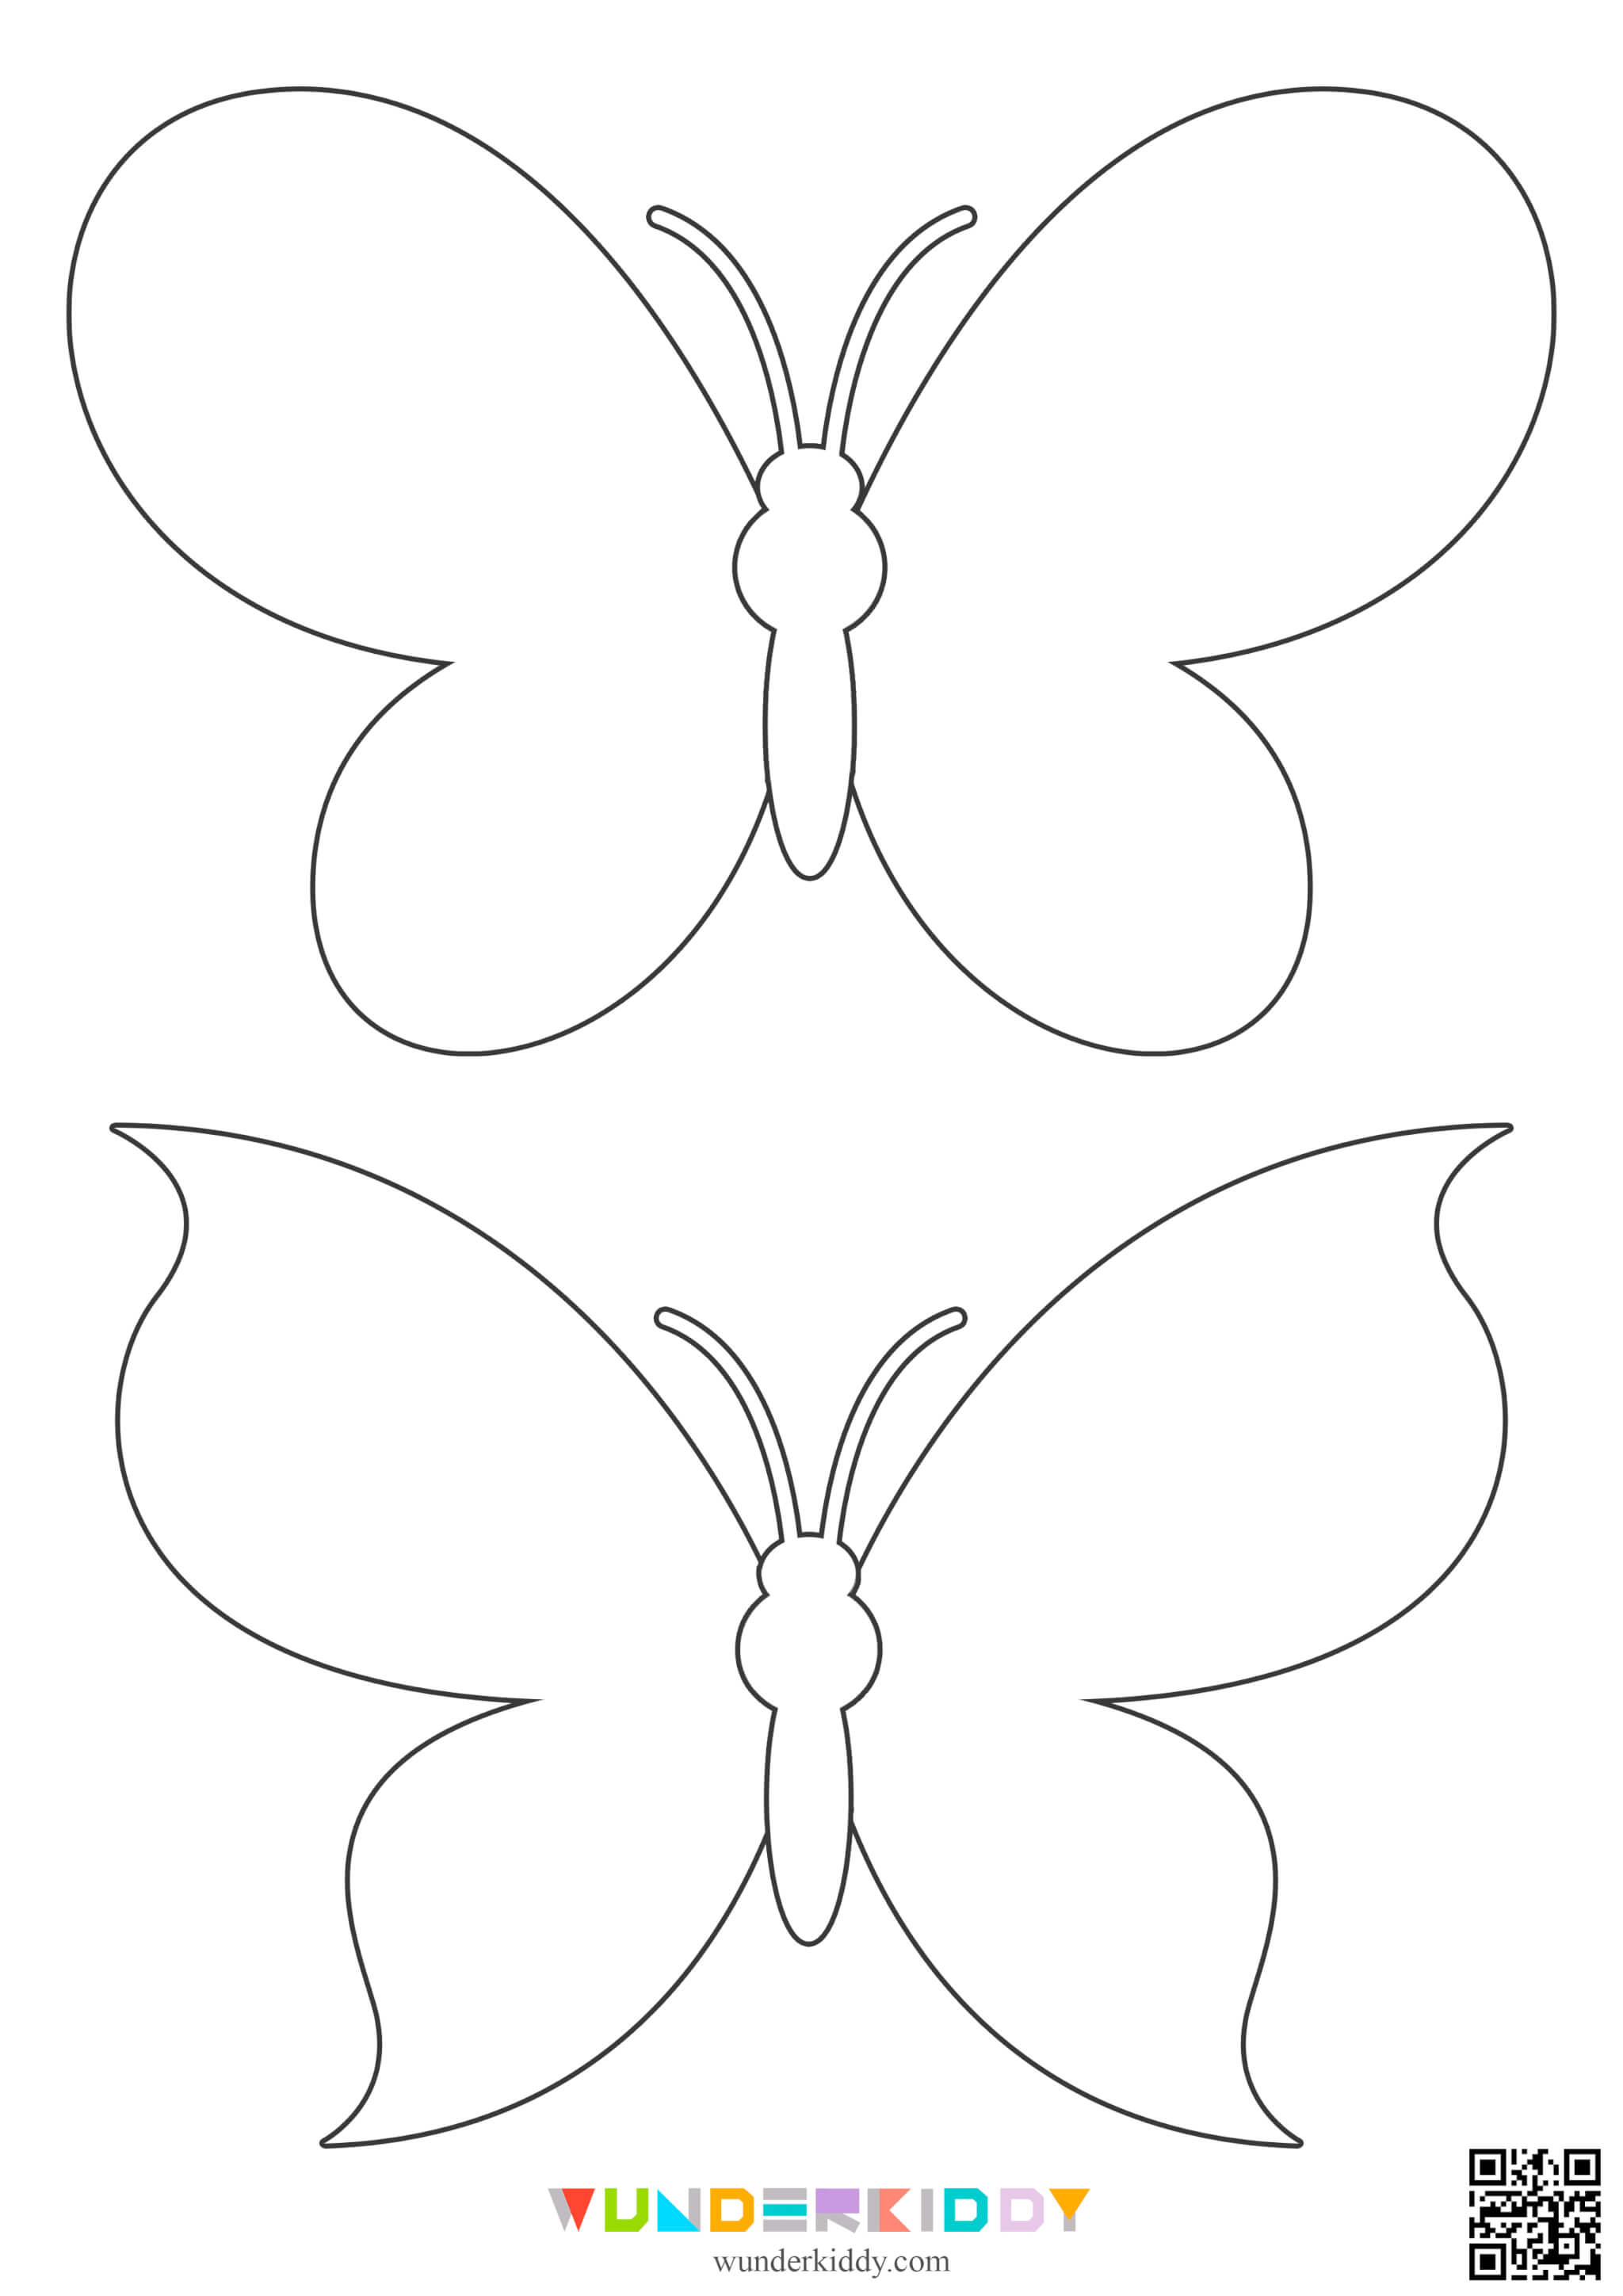 Free Printable Butterfly Templates - Image 3